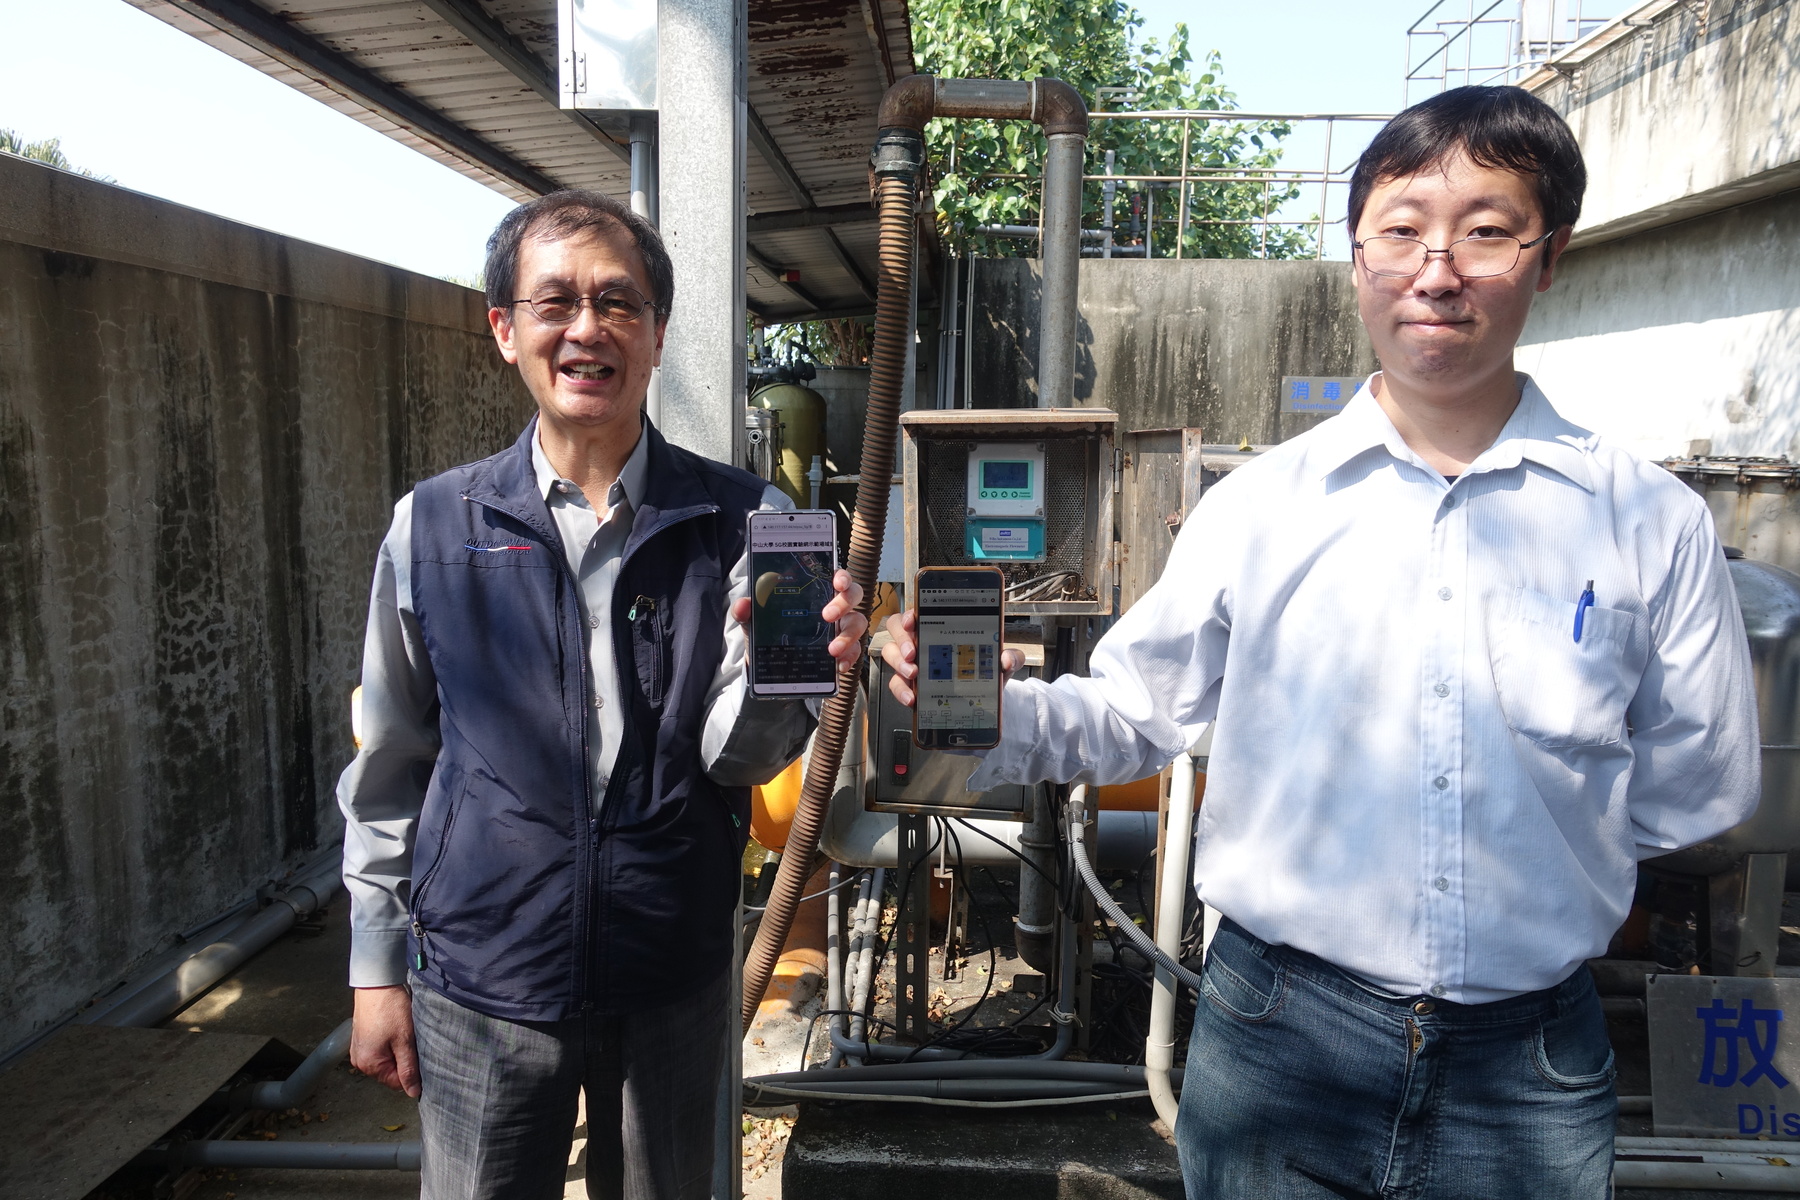 Director of the cross-campus University Research Center for Wireless Broadband Communication Protocols at NSYSU Tsang-Ling Sheu (on the left) created a smart sewage treatment plant on campus using 5G network and AIoT, to allow supervisors to monitor sewage treatment process online using a smartphone.